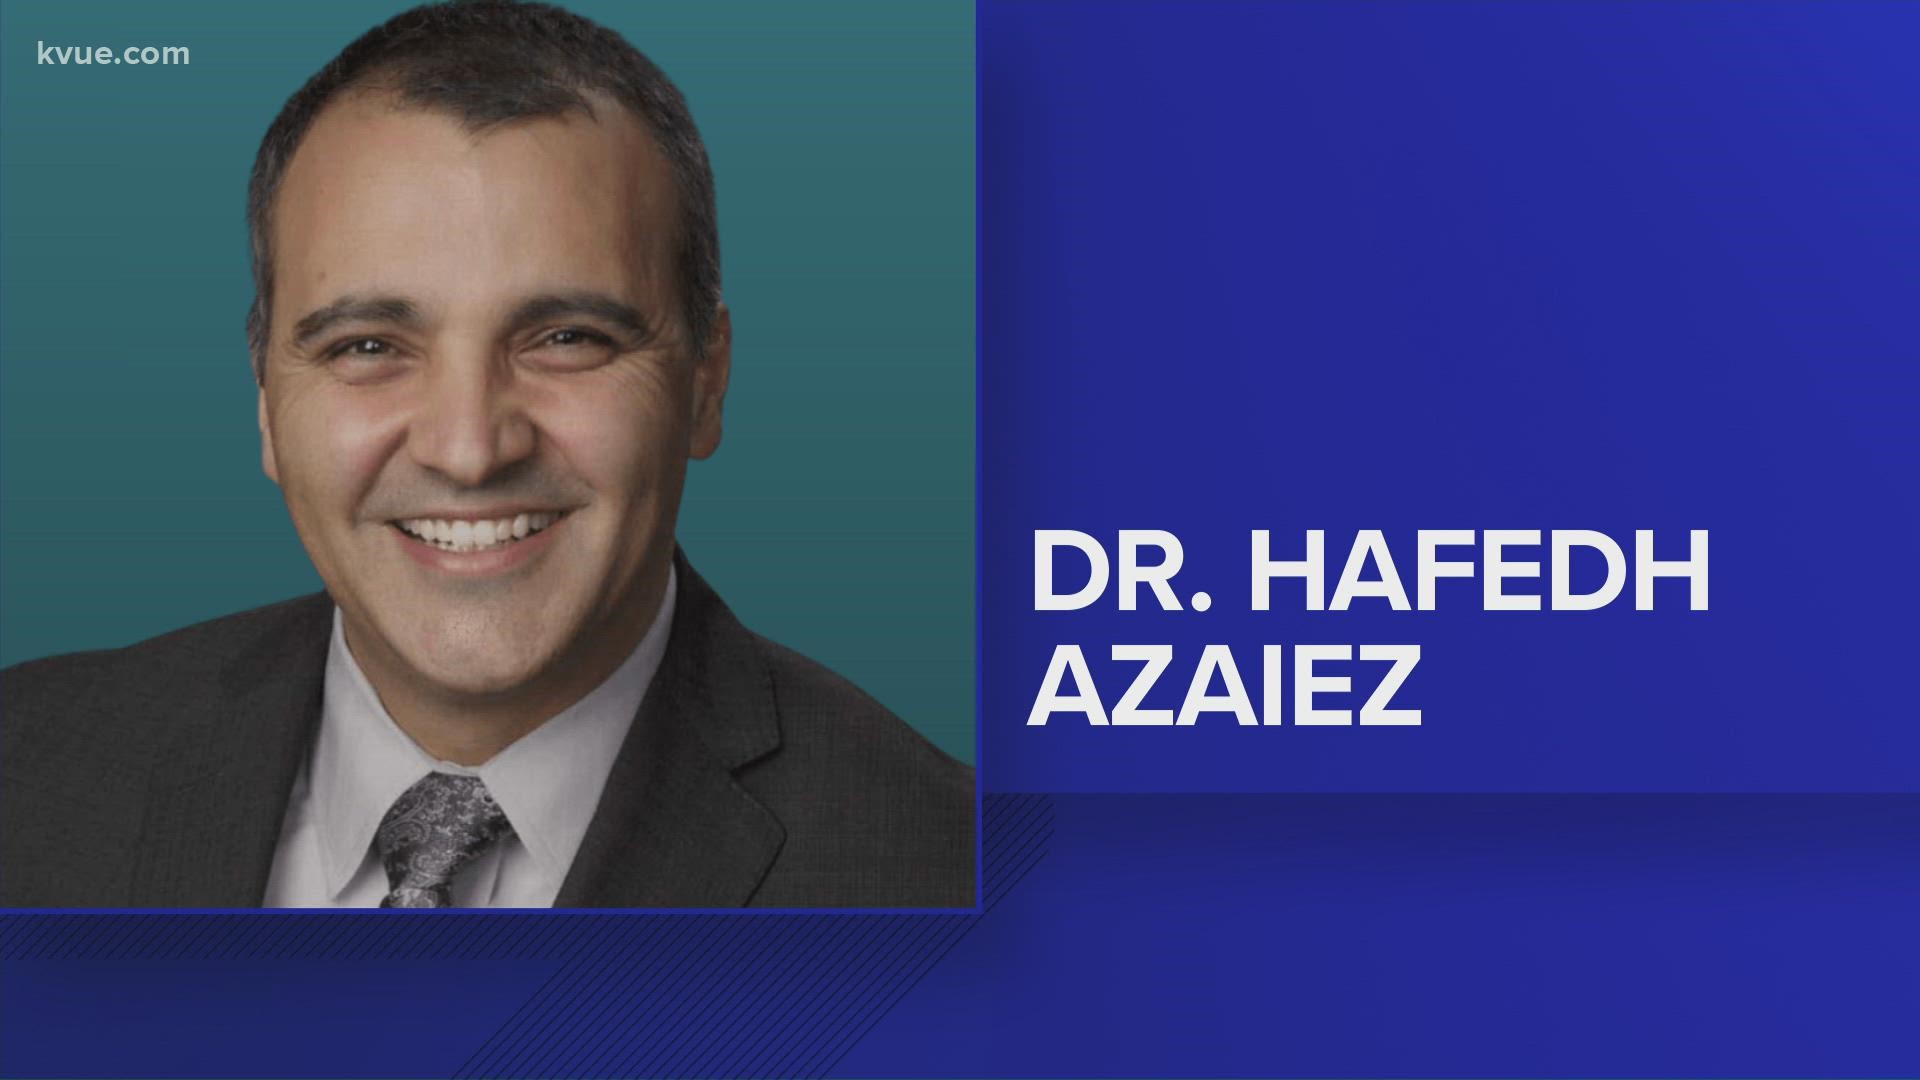 The board also approved hiring an external investigator to examine misconduct allegations unrelated to Dr. Hafedh Azaiez's duties as superintendent.